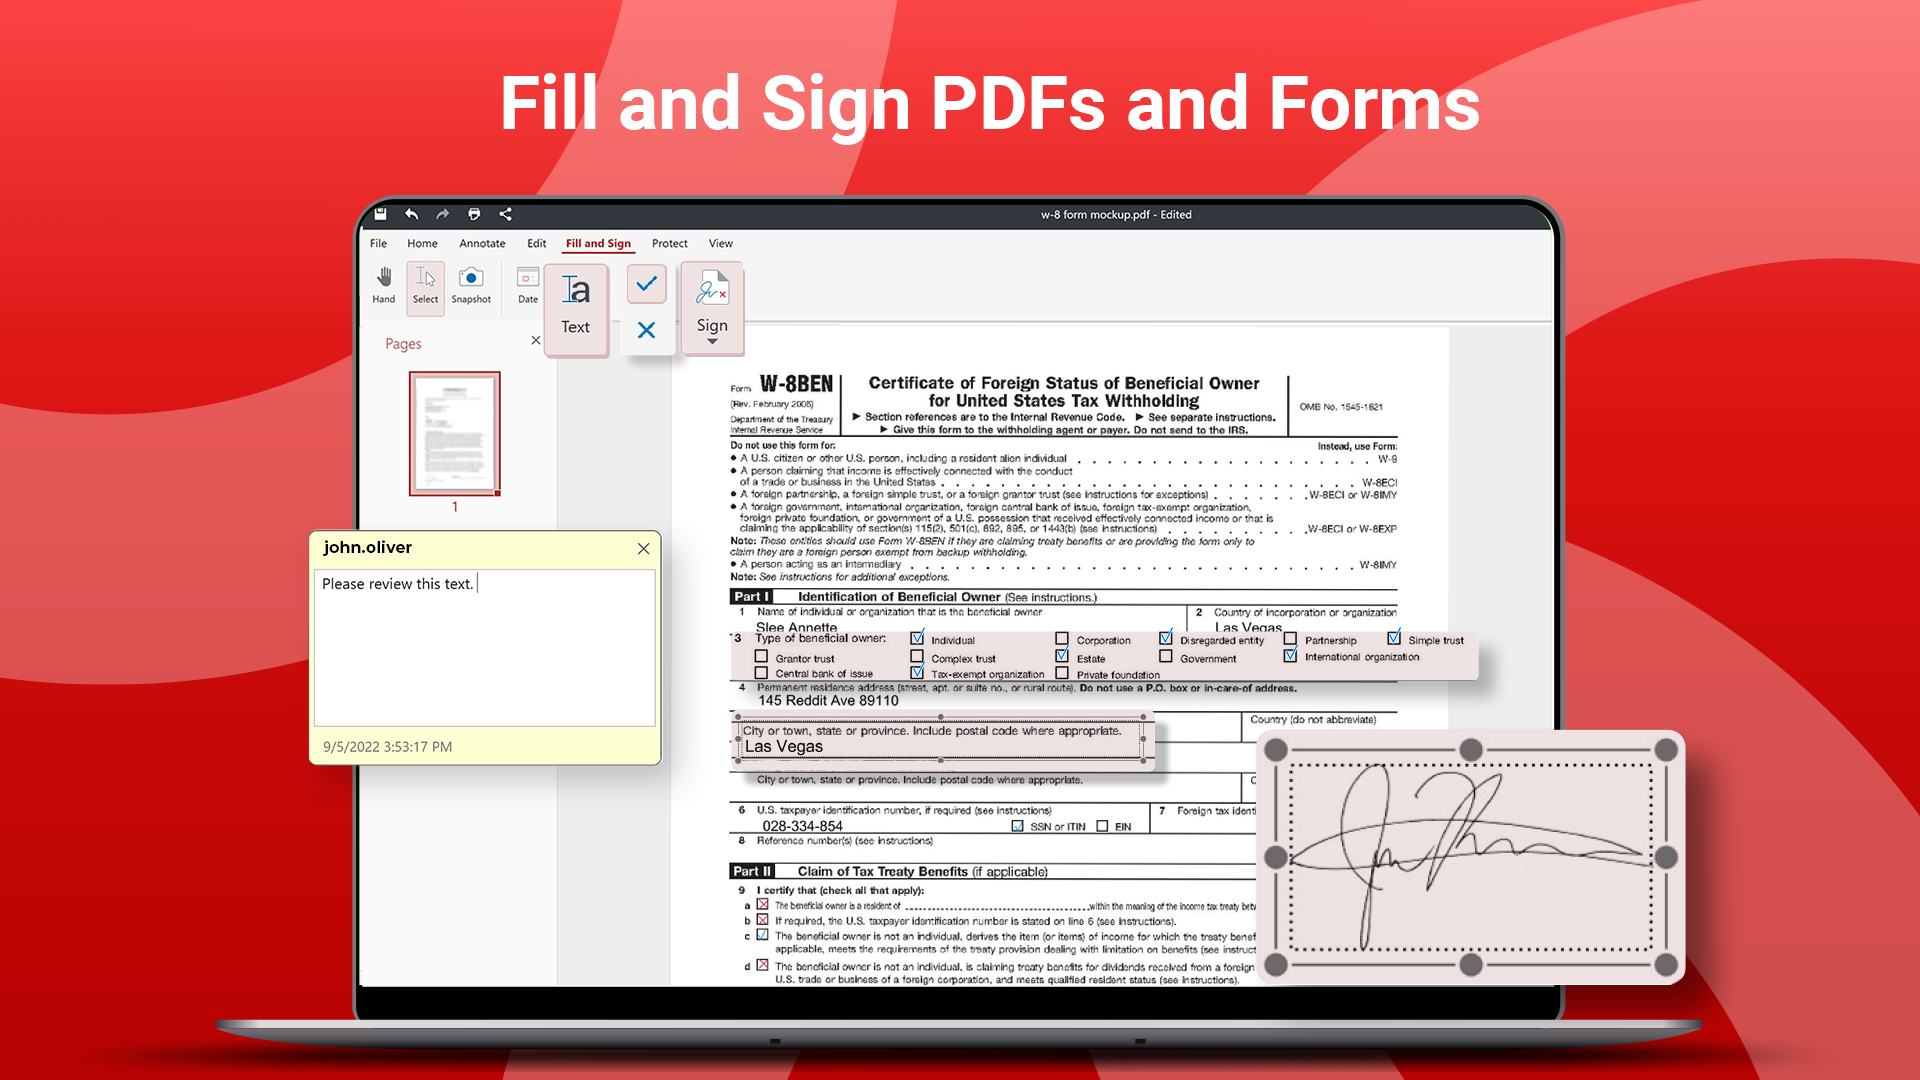 Fill and Sign PDFs and Forms